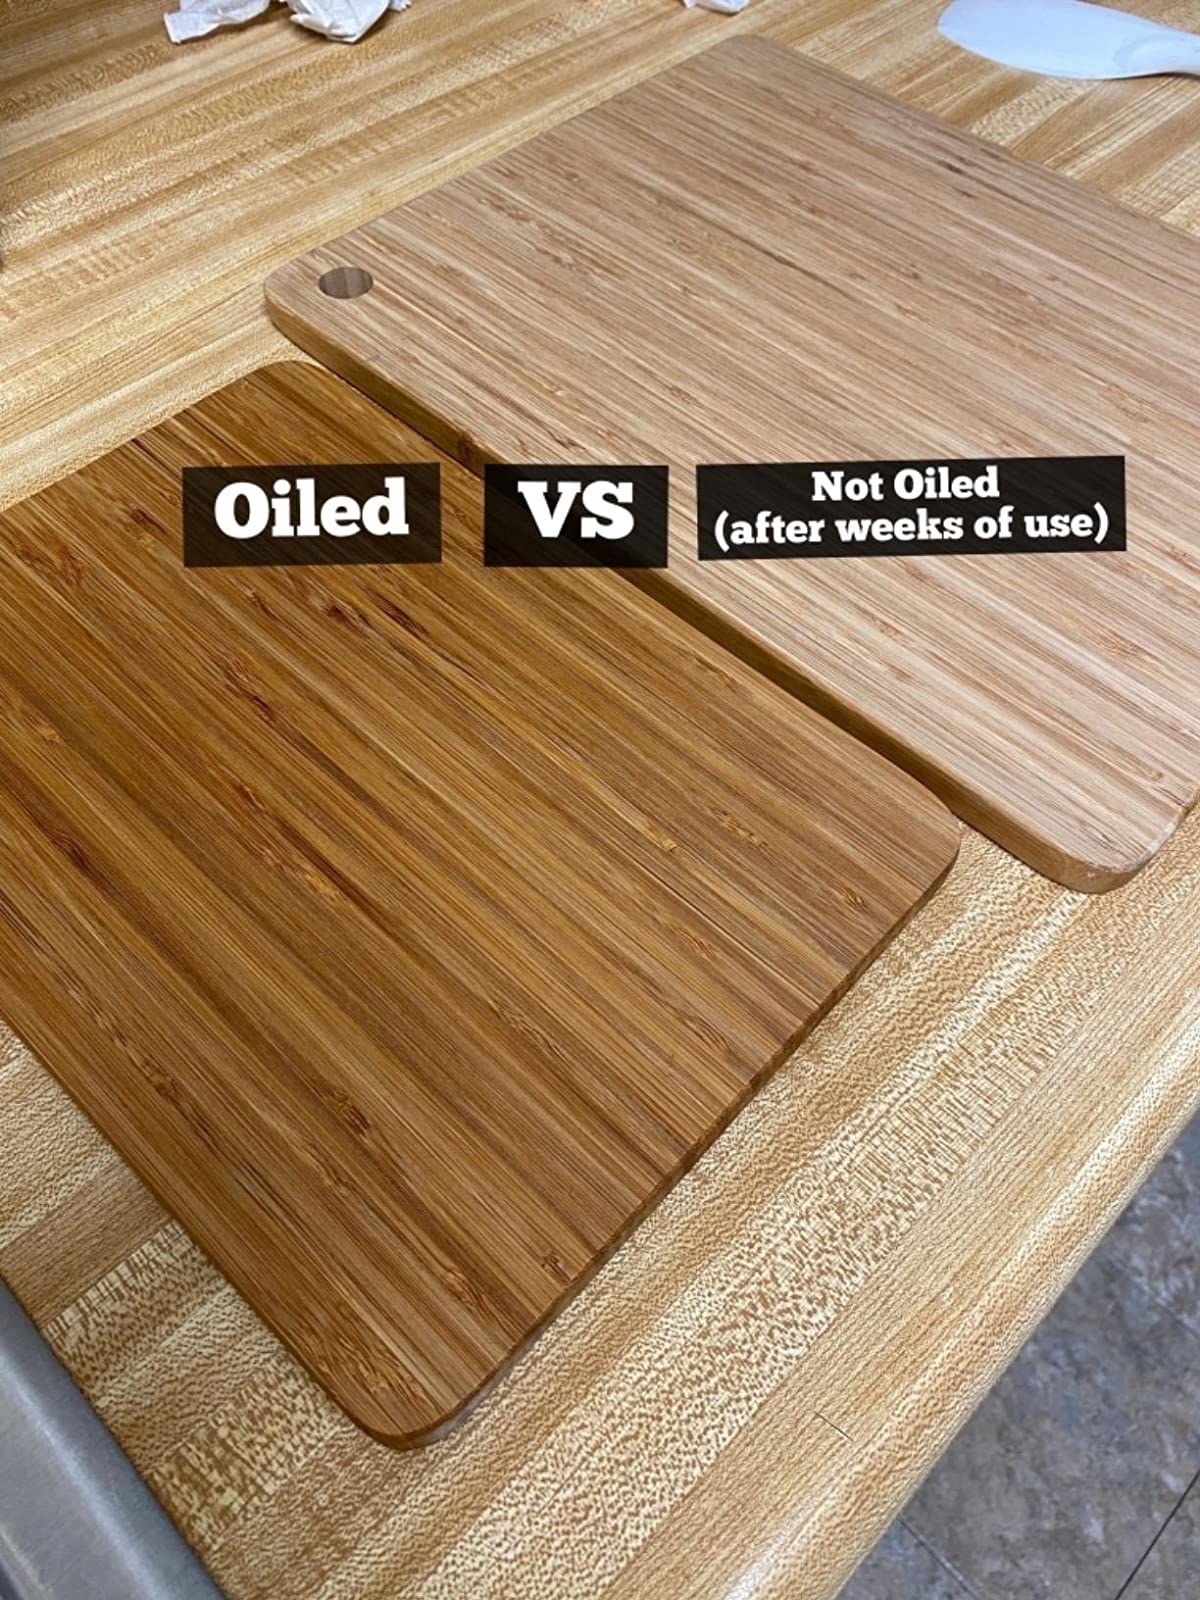 A customer review photo of two identical cutting boards side-by-side, one oiled, dark, and shiny, the other not oiled and pale